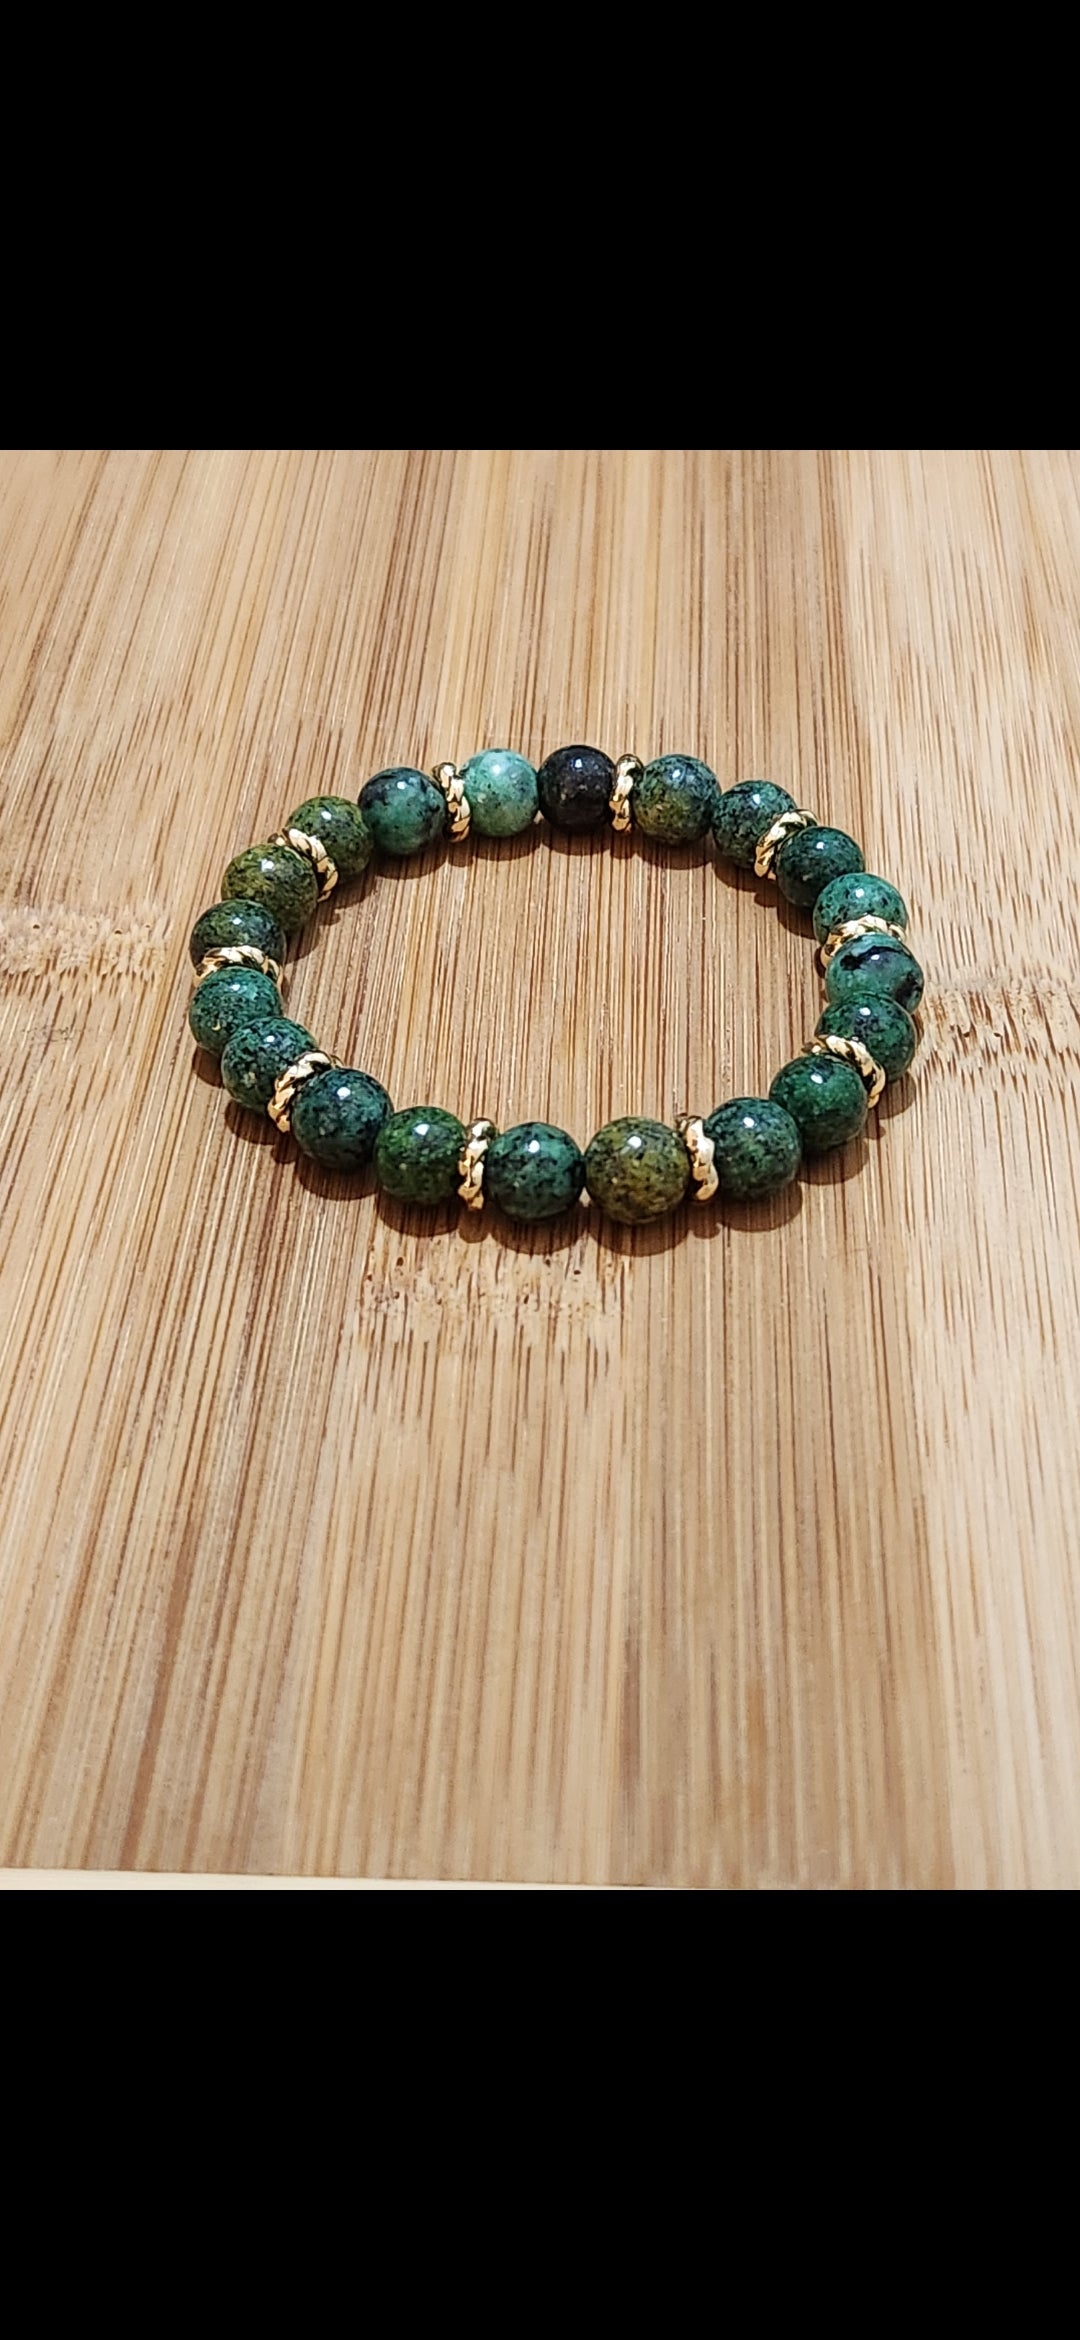 Green African Turquoise Stone beaded bracelet with accents - wisdom - good fortune - renewal